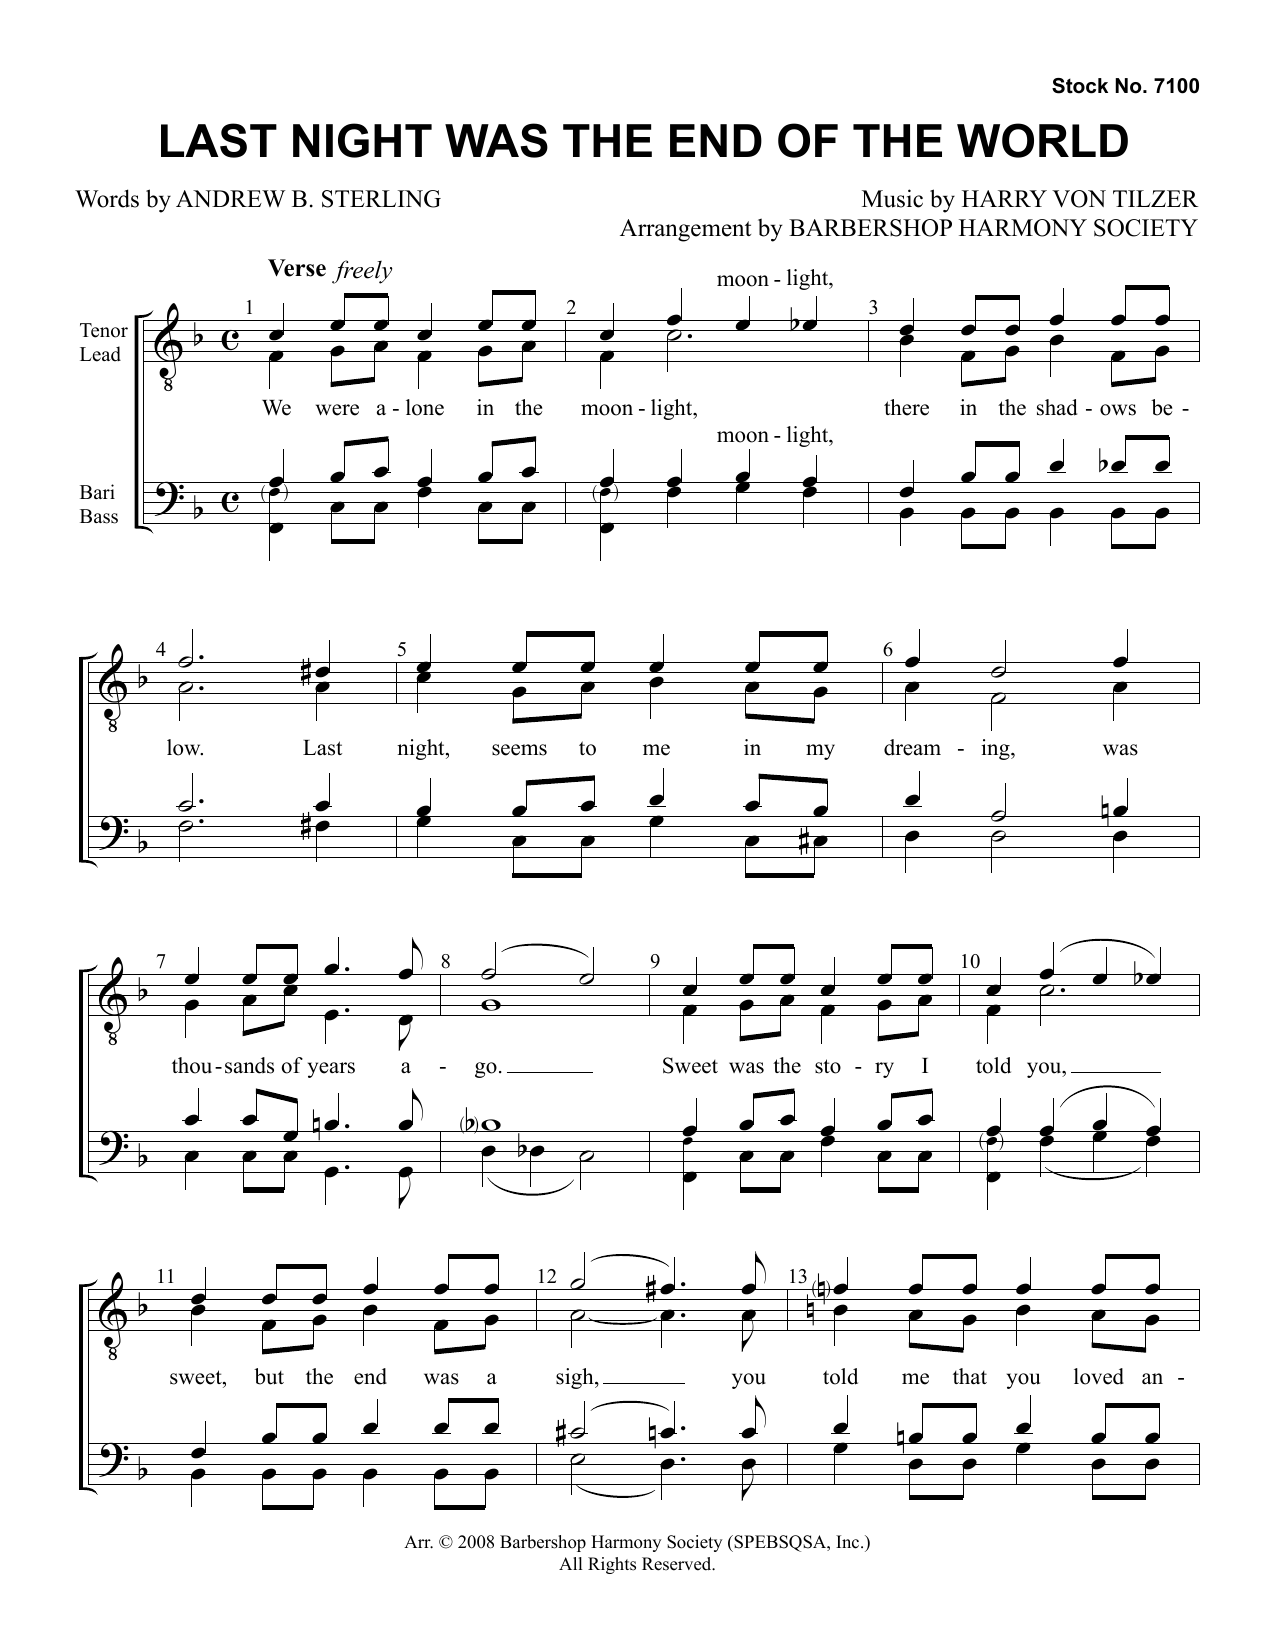 Andrew B. Sterling & Harry von Tilzer Last Night Was The End Of The World (arr. Barbershop Harmony Society) sheet music notes and chords. Download Printable PDF.